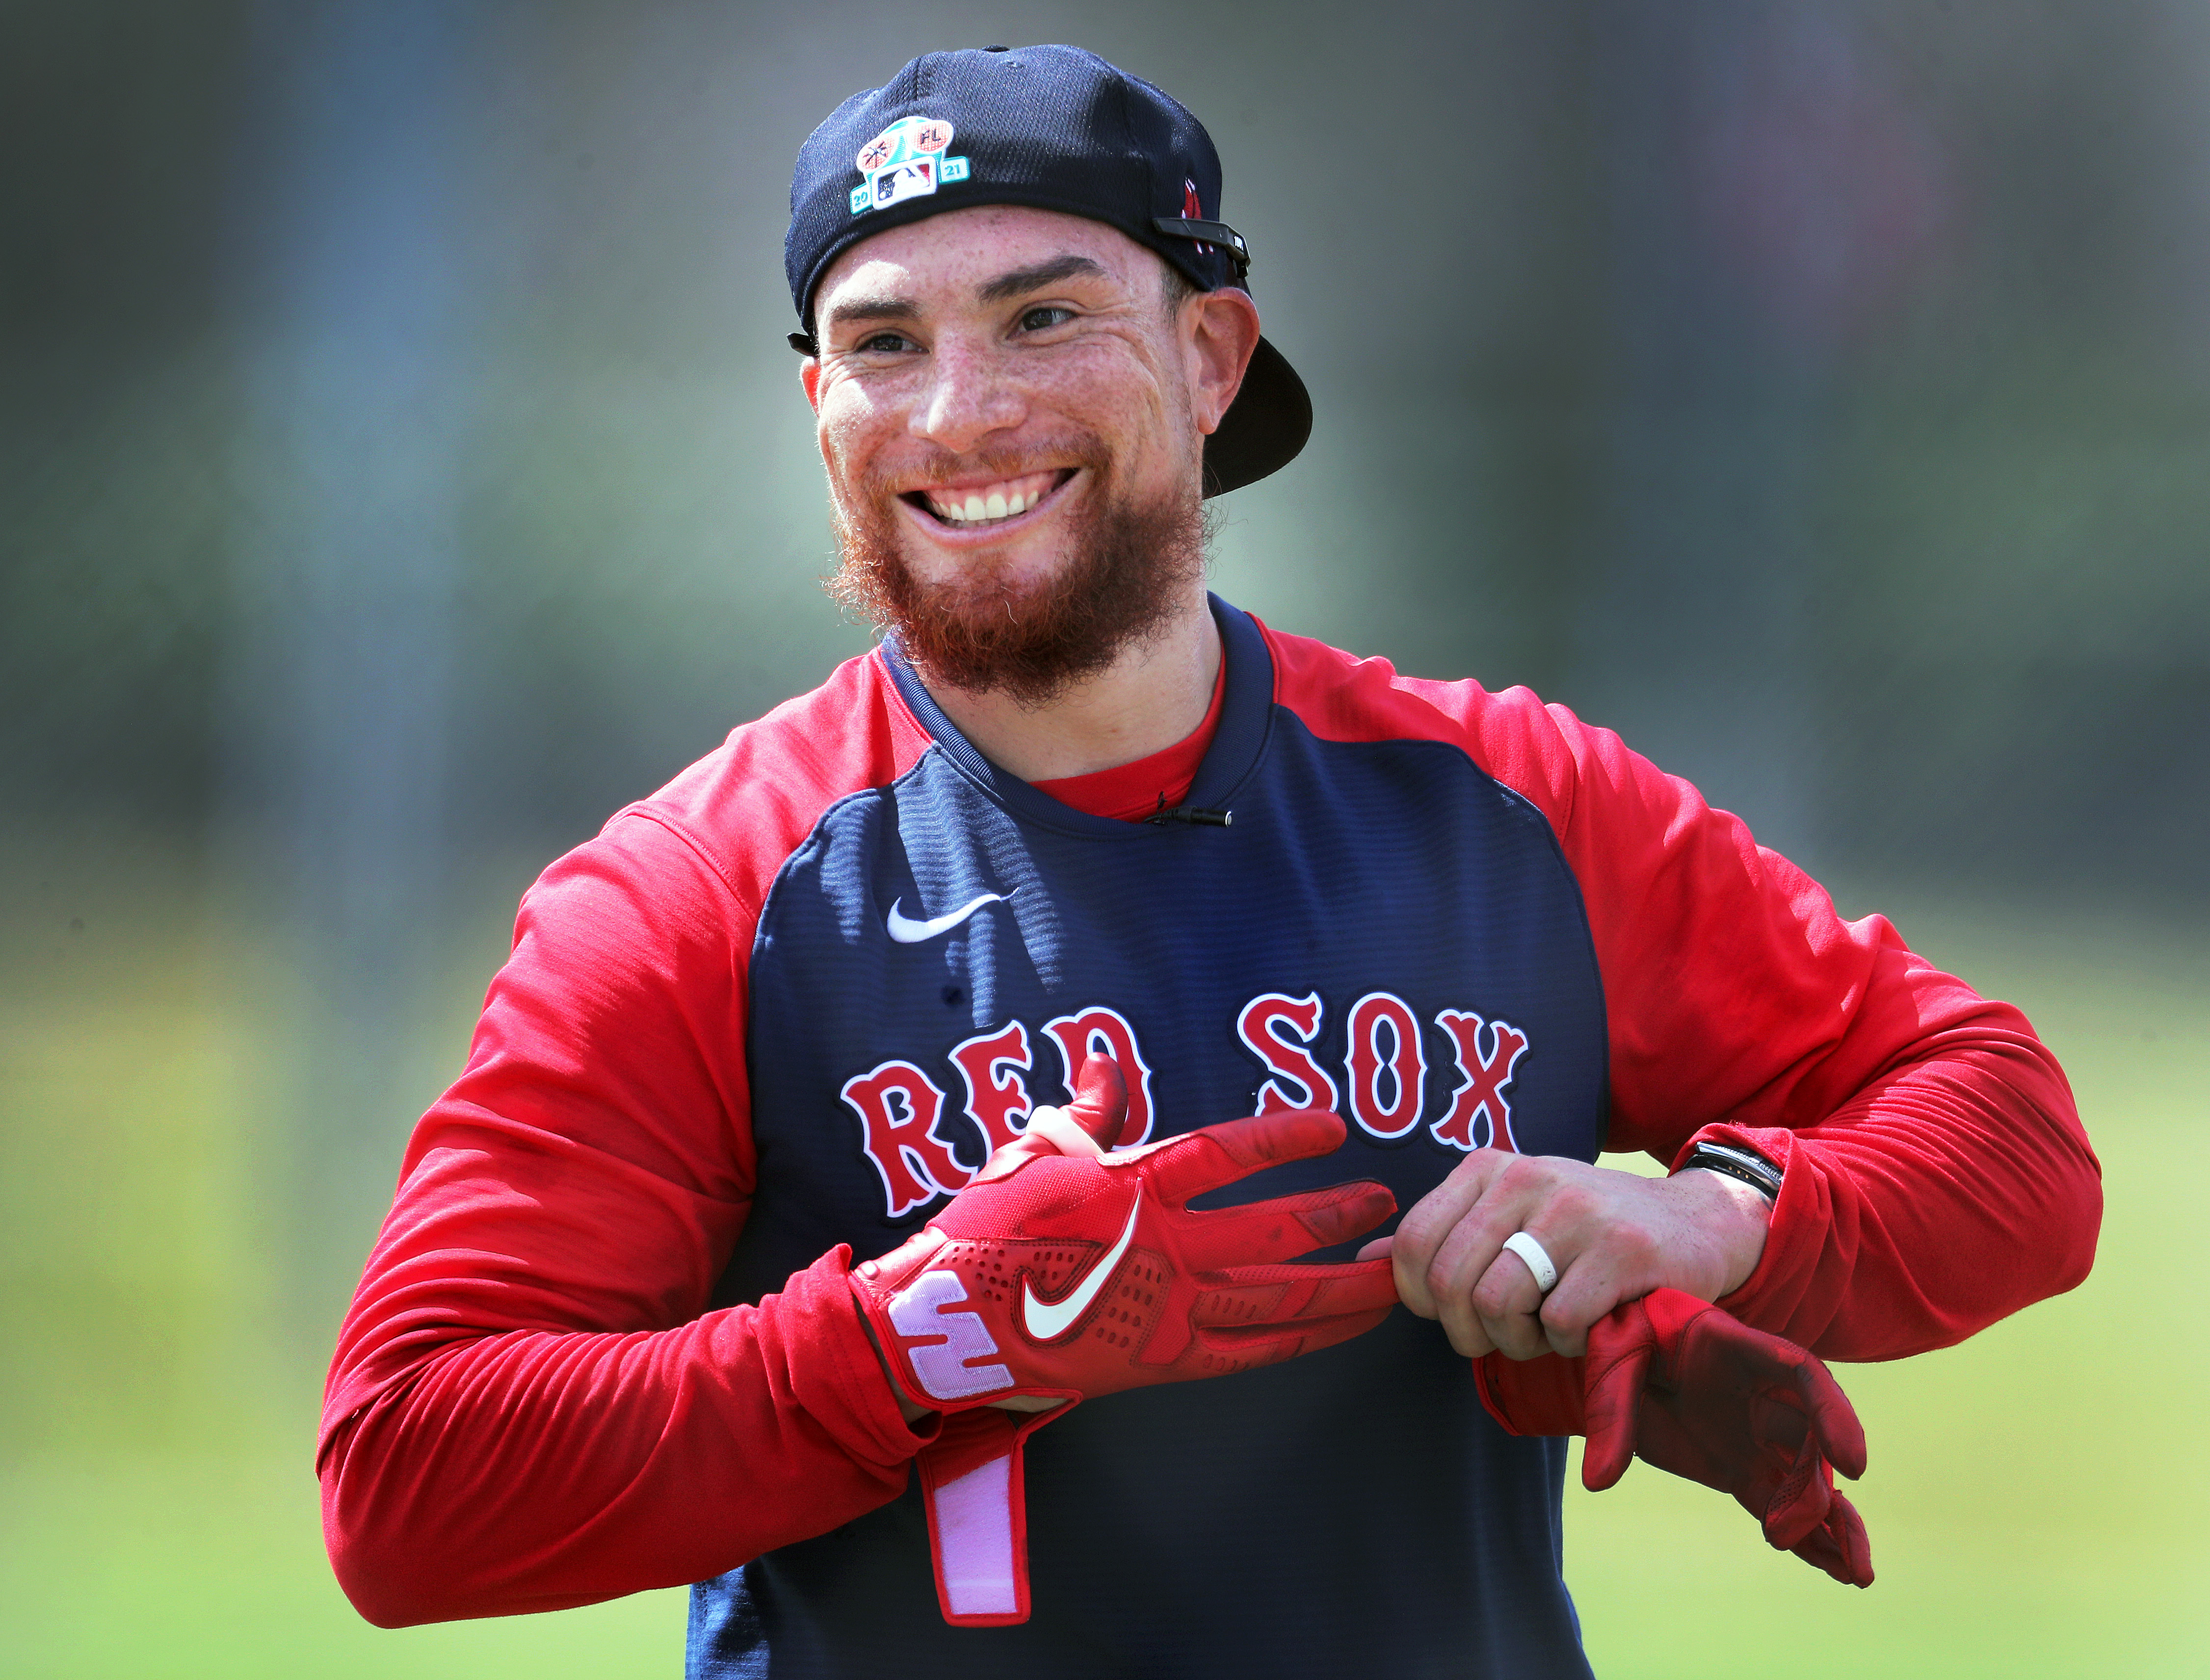 Red Sox on X: Your 2021 Wild Card roster